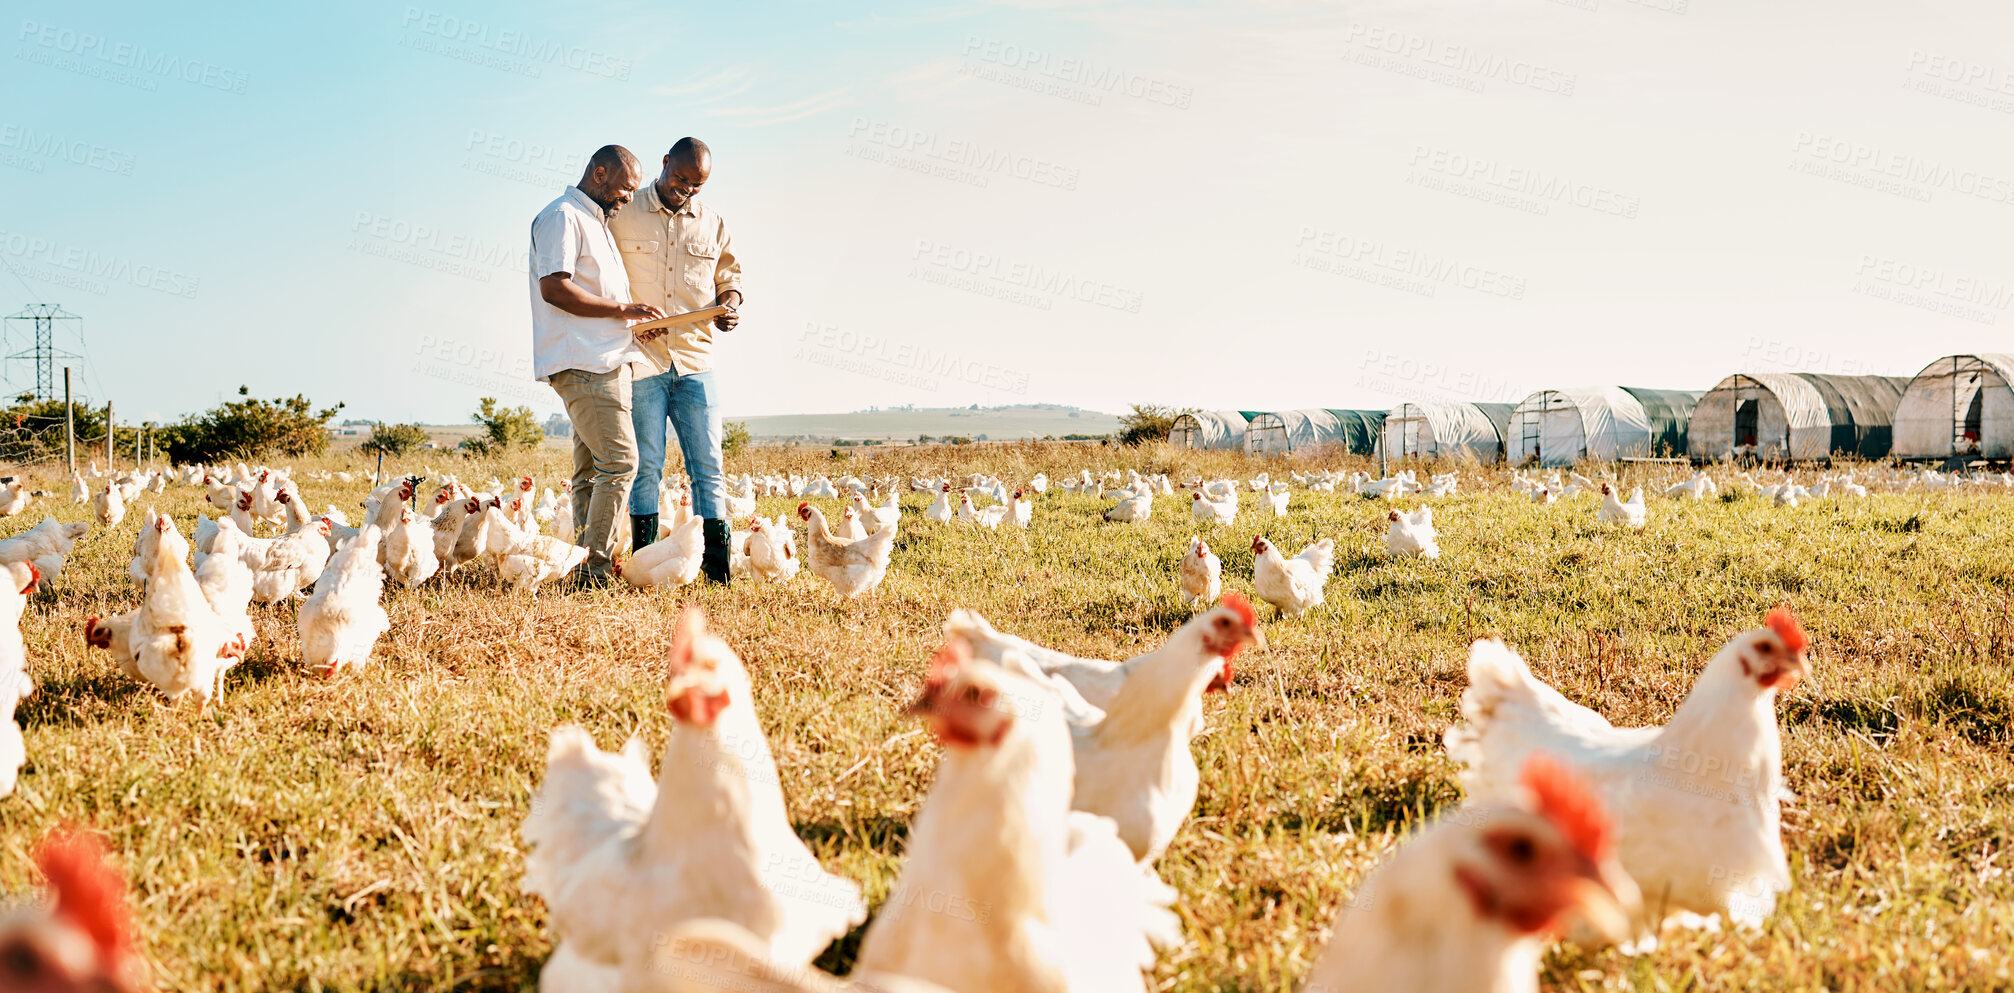 Buy stock photo Black people, clipboard and farm with chicken livestock in agriculture and outdoor resources. Happy men working together for farming, sustainability and growth in supply chain in the countryside